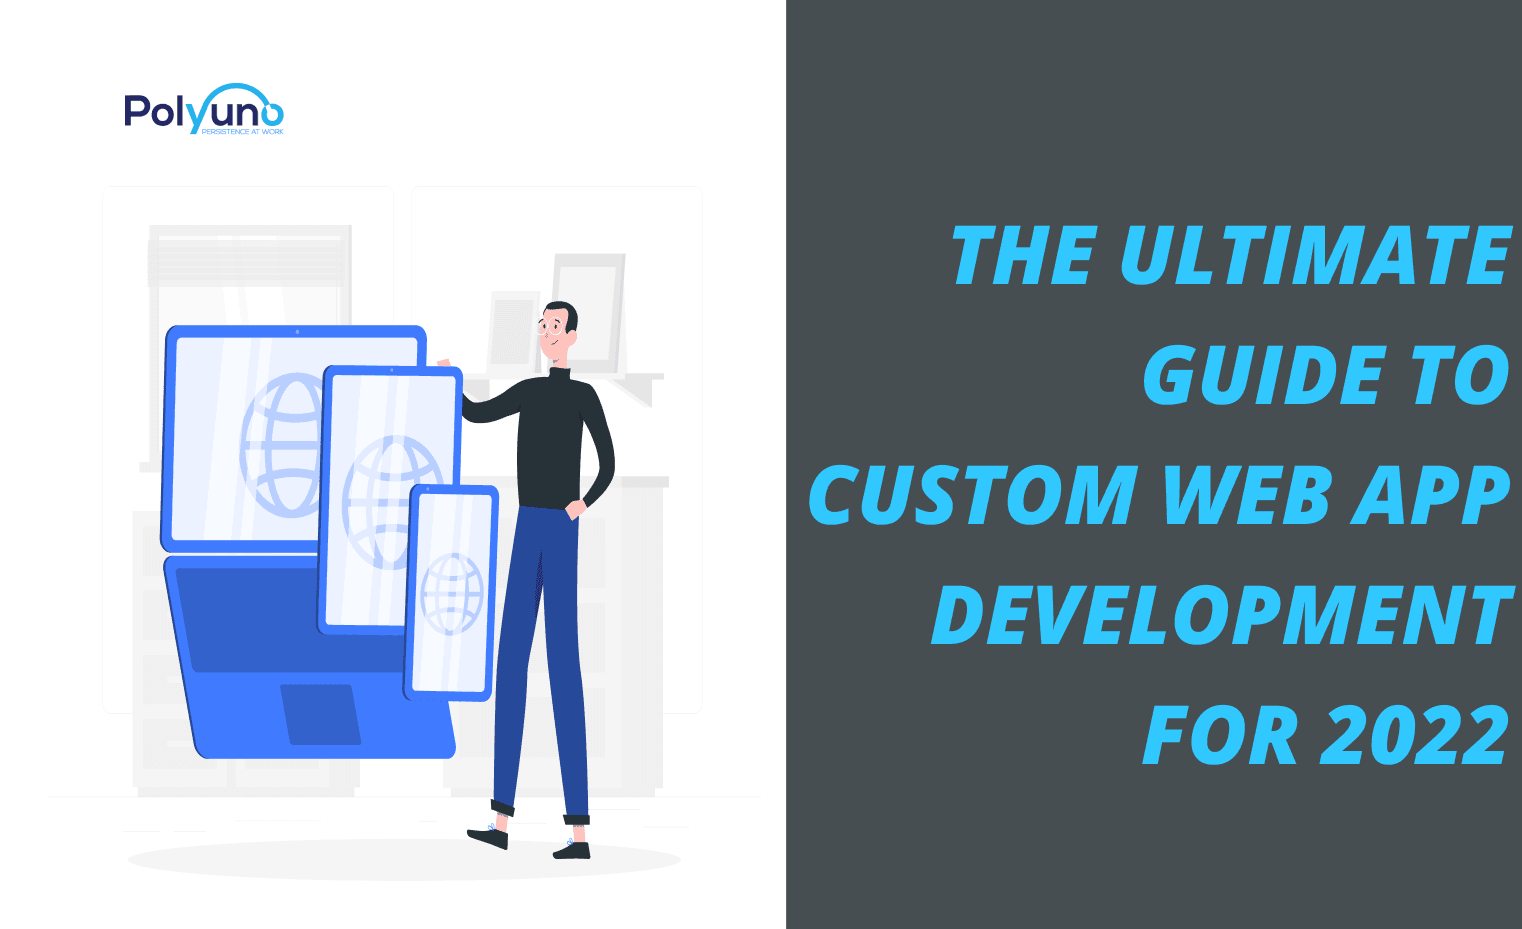 The Ultimate Guide To Custom Web App Development For 2022 cover